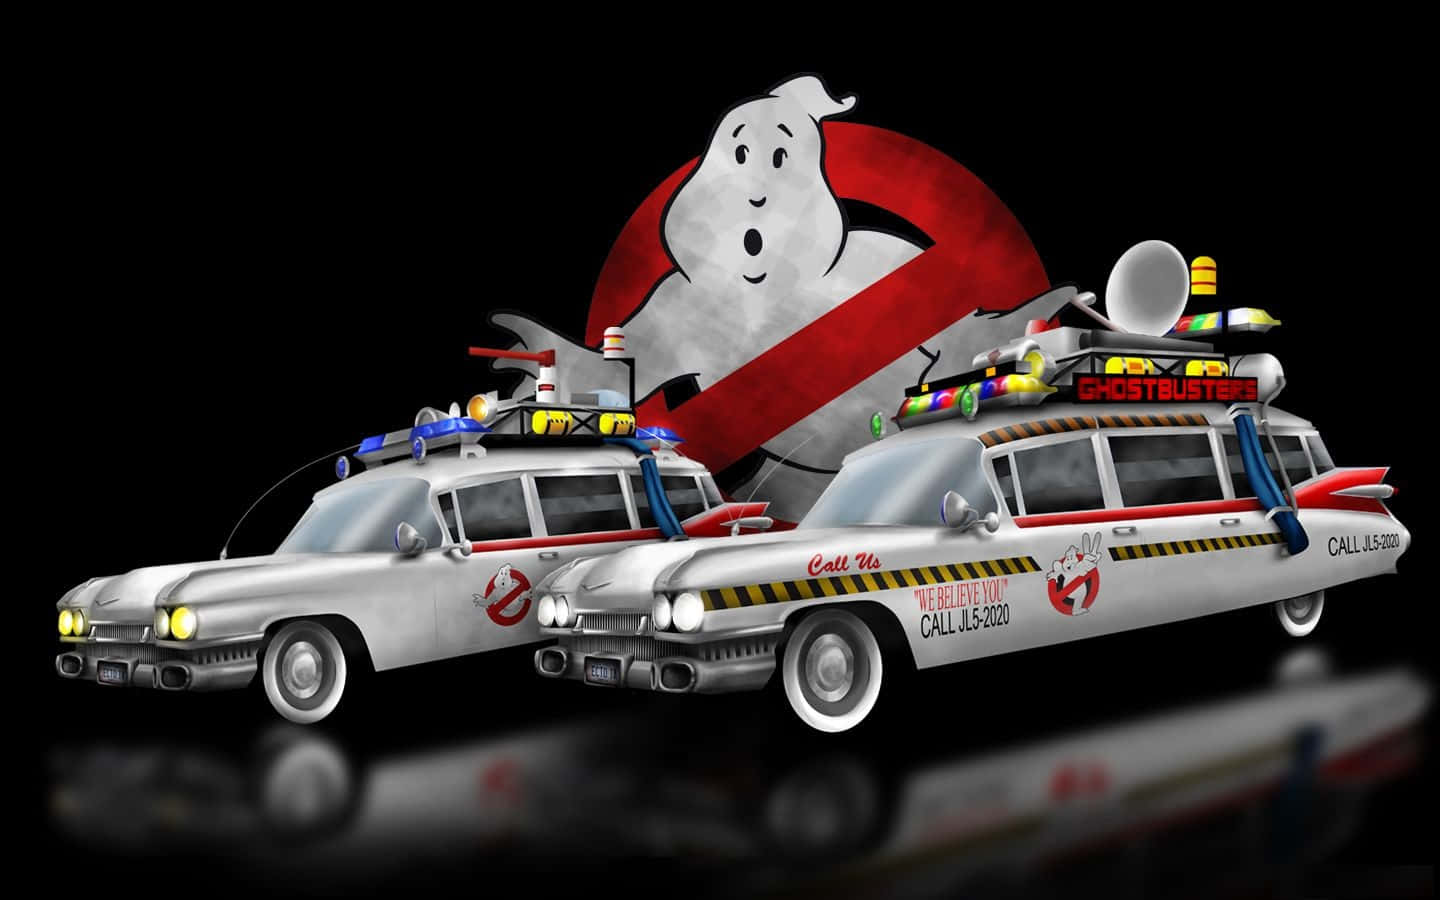 It's not the Stay-Puft Marshmallow Man, but Ghostbusters still has you covered!